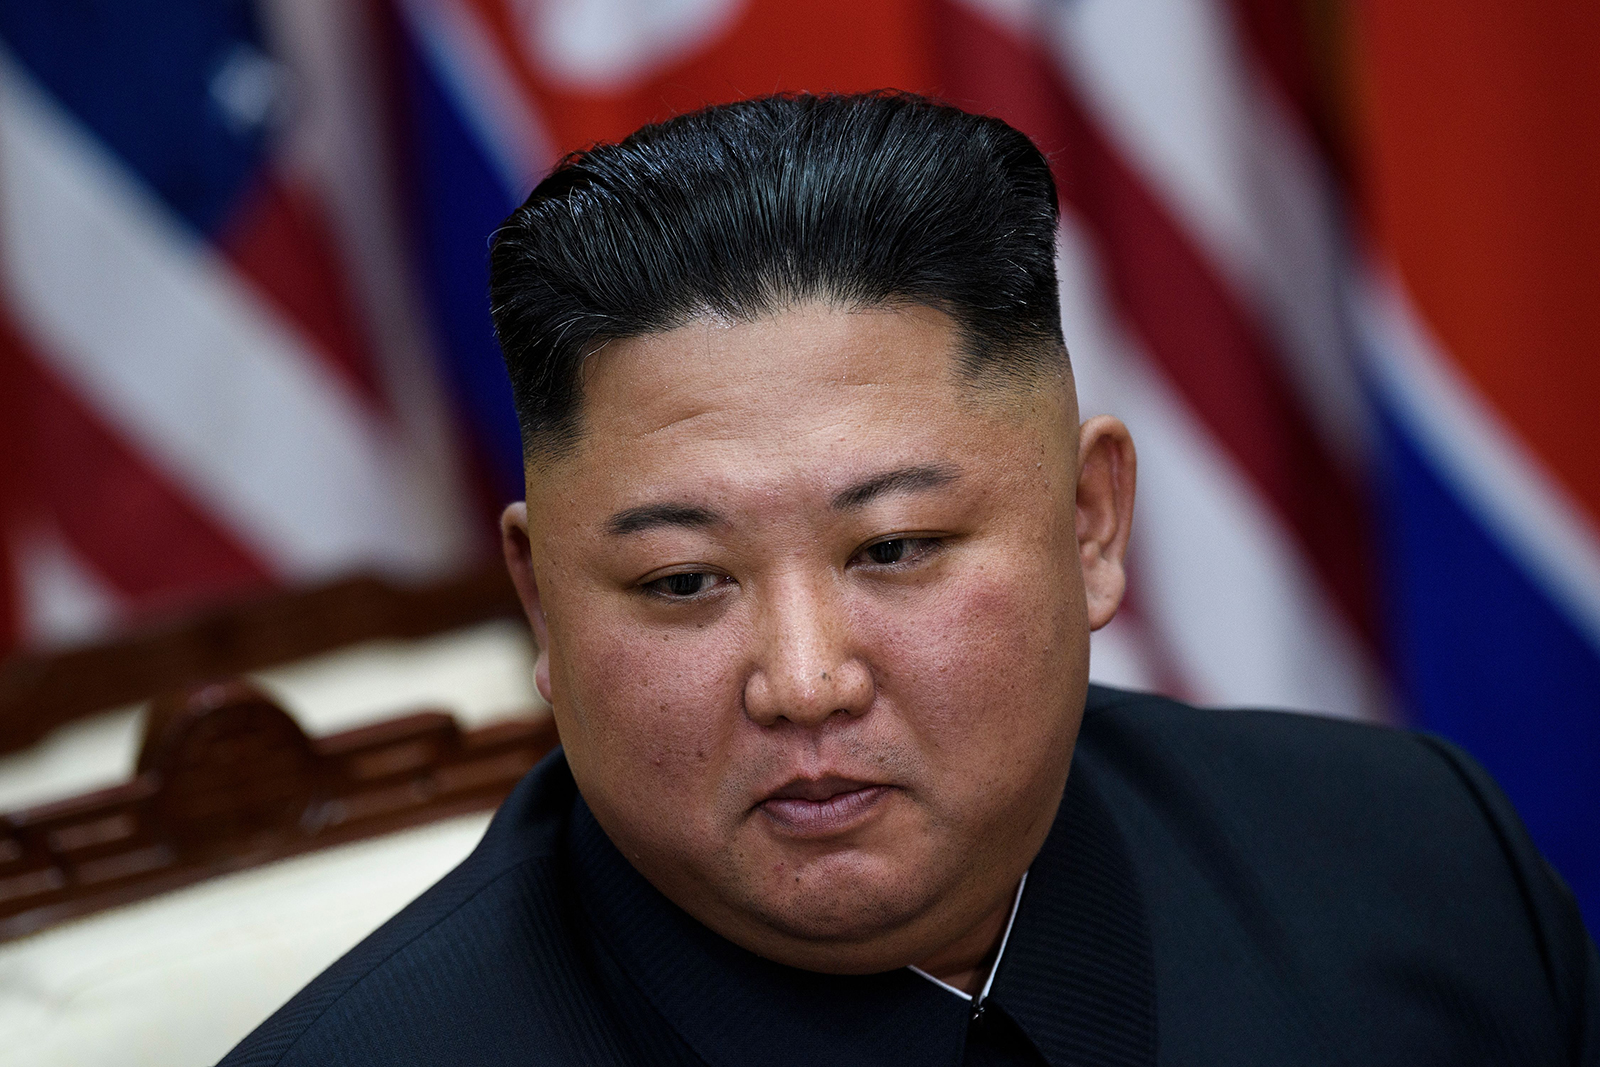 North Korea's leader Kim Jong-Un before a meeting with US President Donald Trump on the south side of the Military Demarcation Line that divides North and South Korea, in the Joint Security Area (JSA) of Panmunjom in the Demilitarized zone (DMZ) on June 30, 2019. 